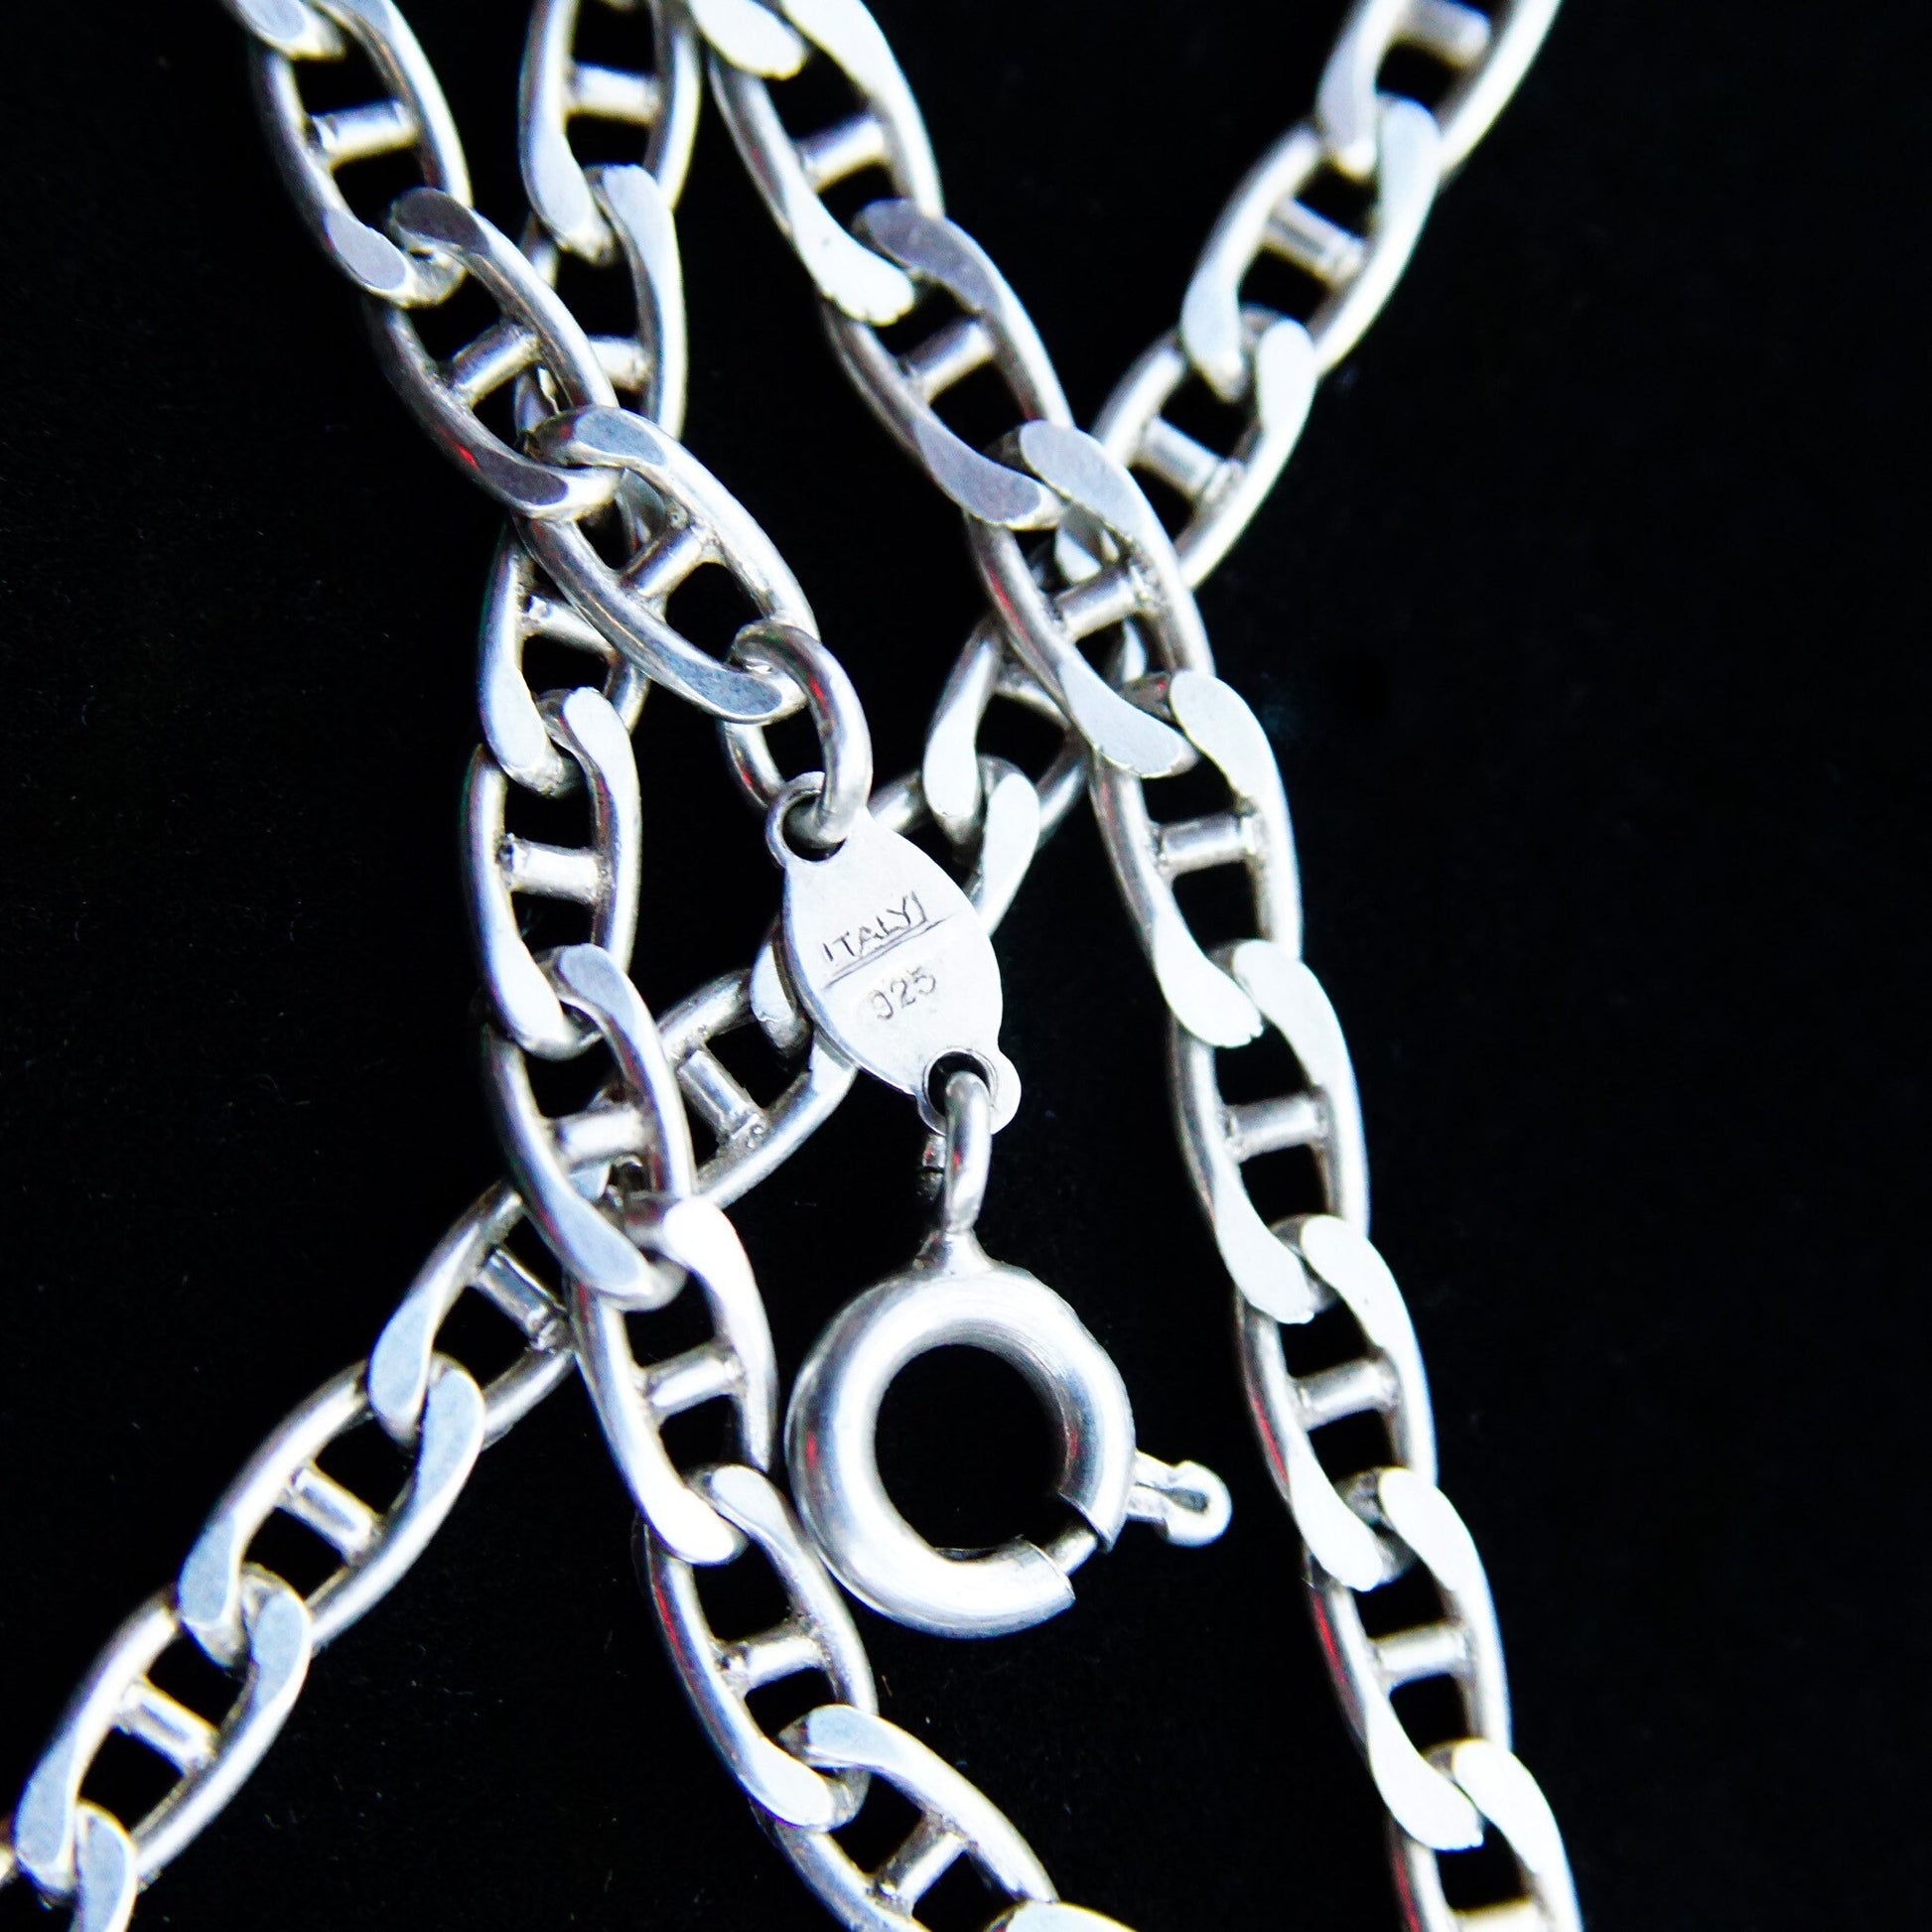 Vintage Italian sterling silver mariner anchor chain necklace, 3.5mm wide links, minimalist unisex solid silver chain, 18.25 inches long, close-up view on black background